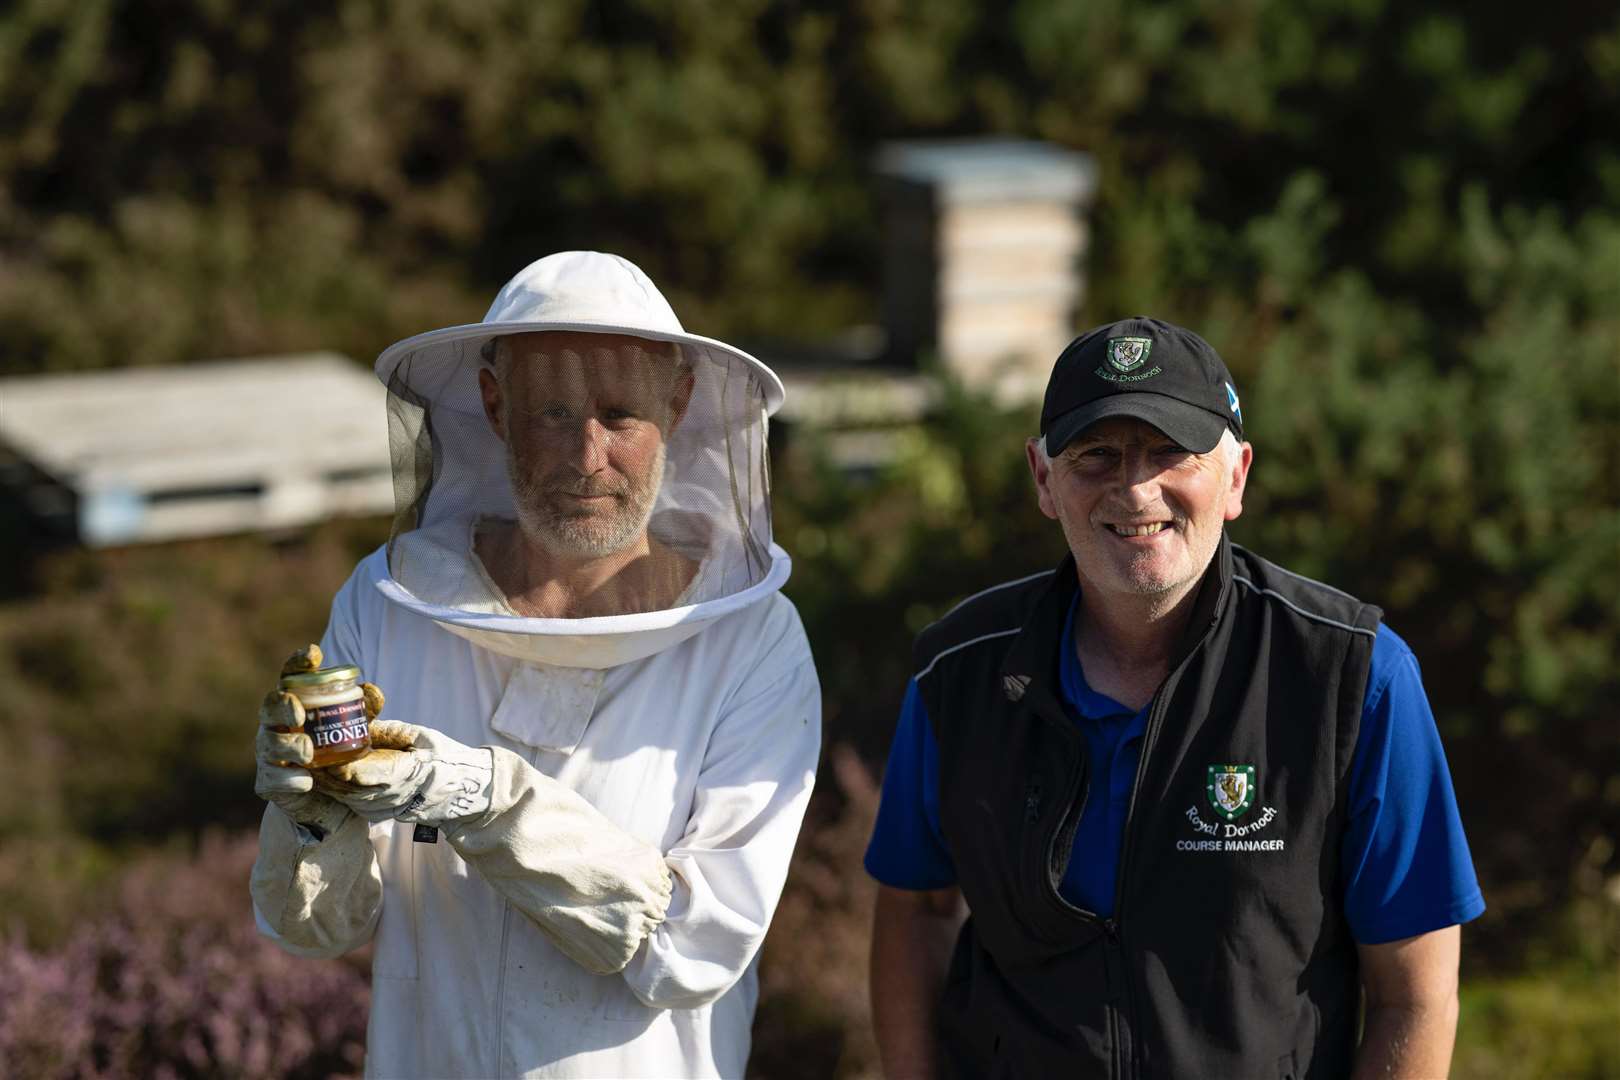 Stuart Gillies and course manager Eoin Riddell pictured near the Royal Dornoch hives. Picture: Matthew Harris